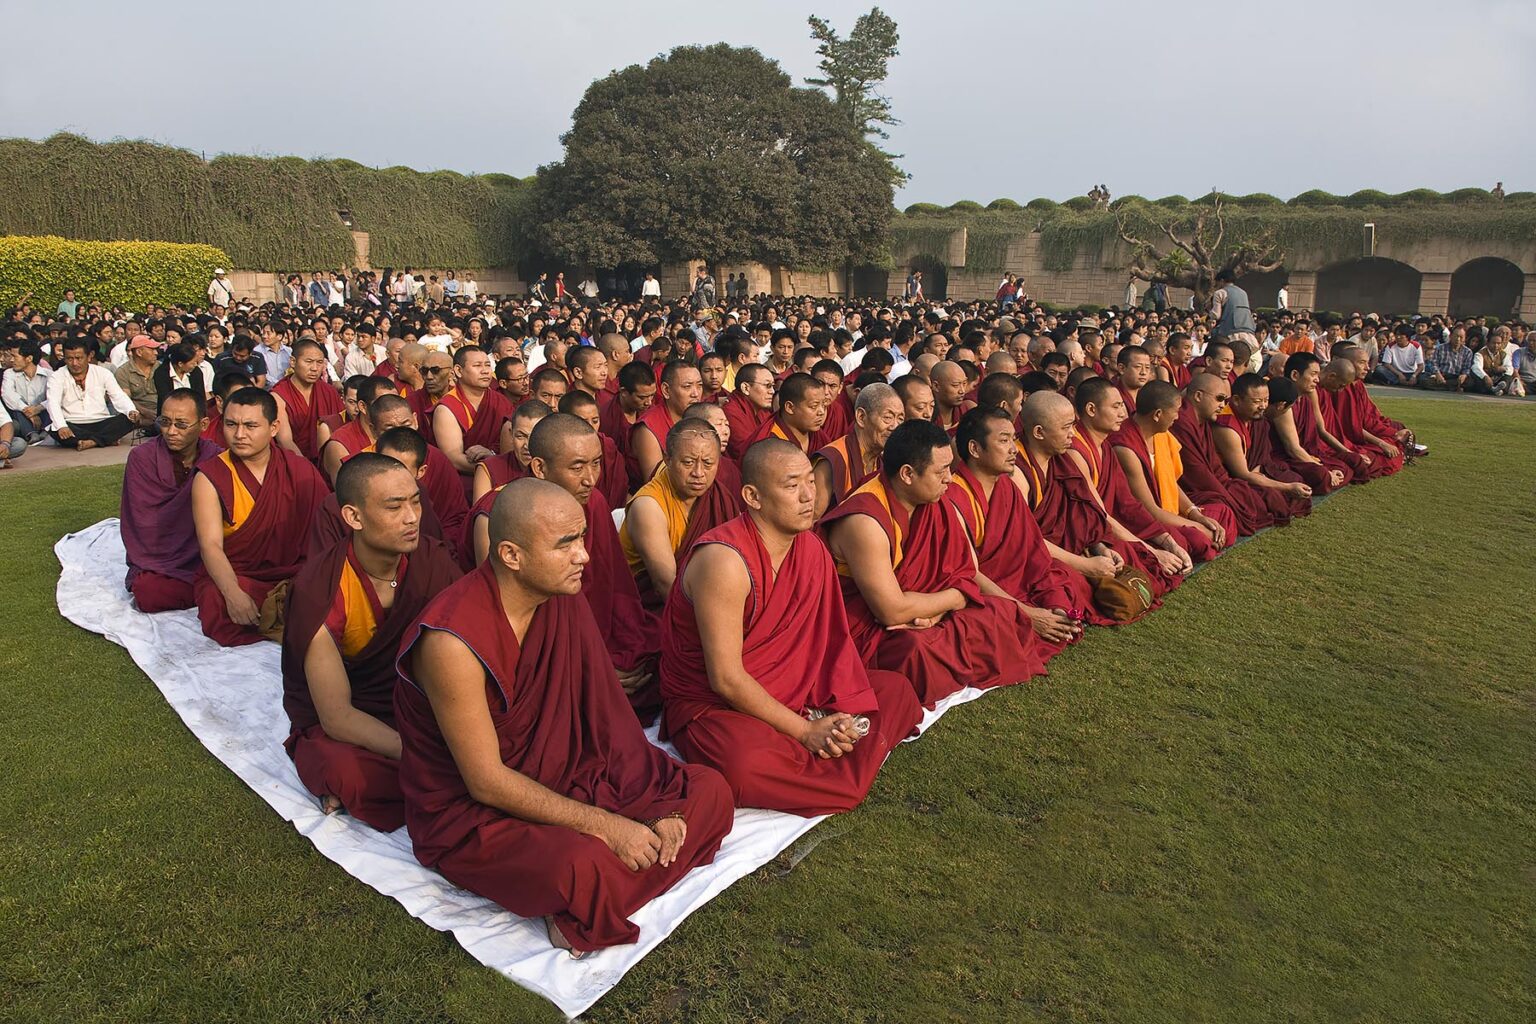 TIBETAN BUDDHIST MONKS attend a PRAYER FOR WORLD PEACE sponsored by the14th Dalai Lama of Tibet at the RAJ GHAT (Ghandi's eternal flame) in April of 2008 -  NEW DELHI, INDIA